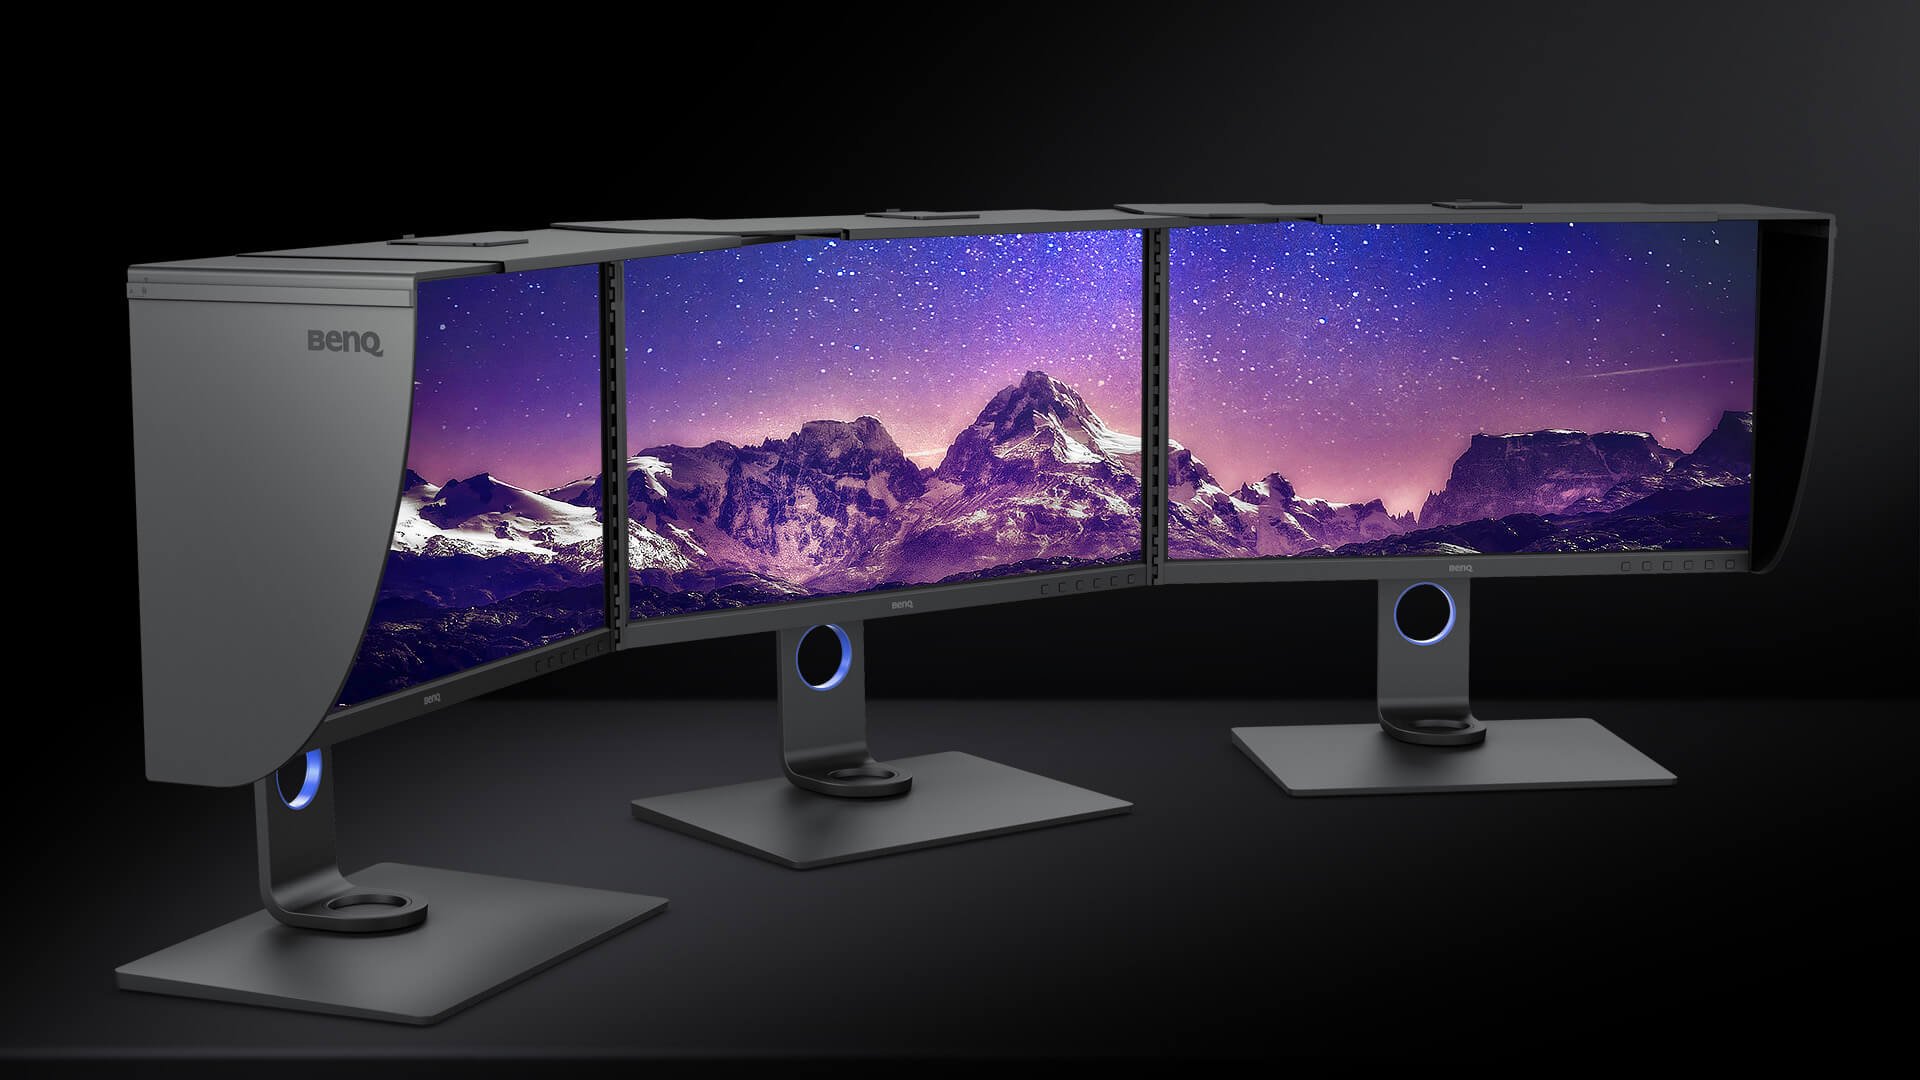 BenQ Shading Hood Bridge HB27 Gets Less Glare and Reflection with a Multi-Hooded-Monitor Setup